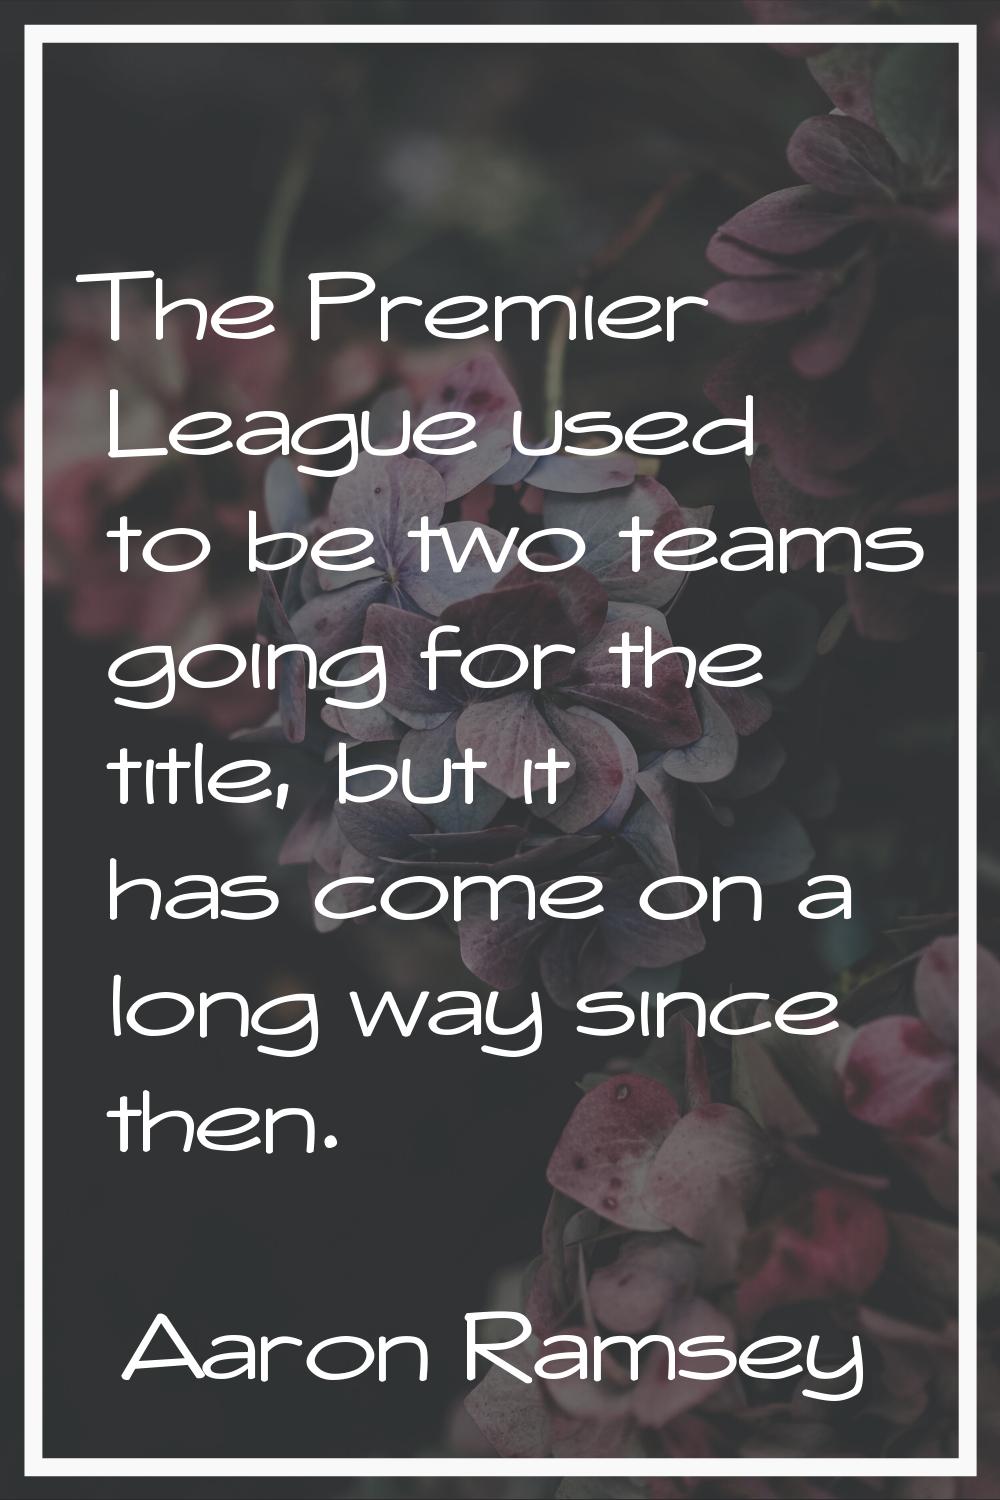 The Premier League used to be two teams going for the title, but it has come on a long way since th